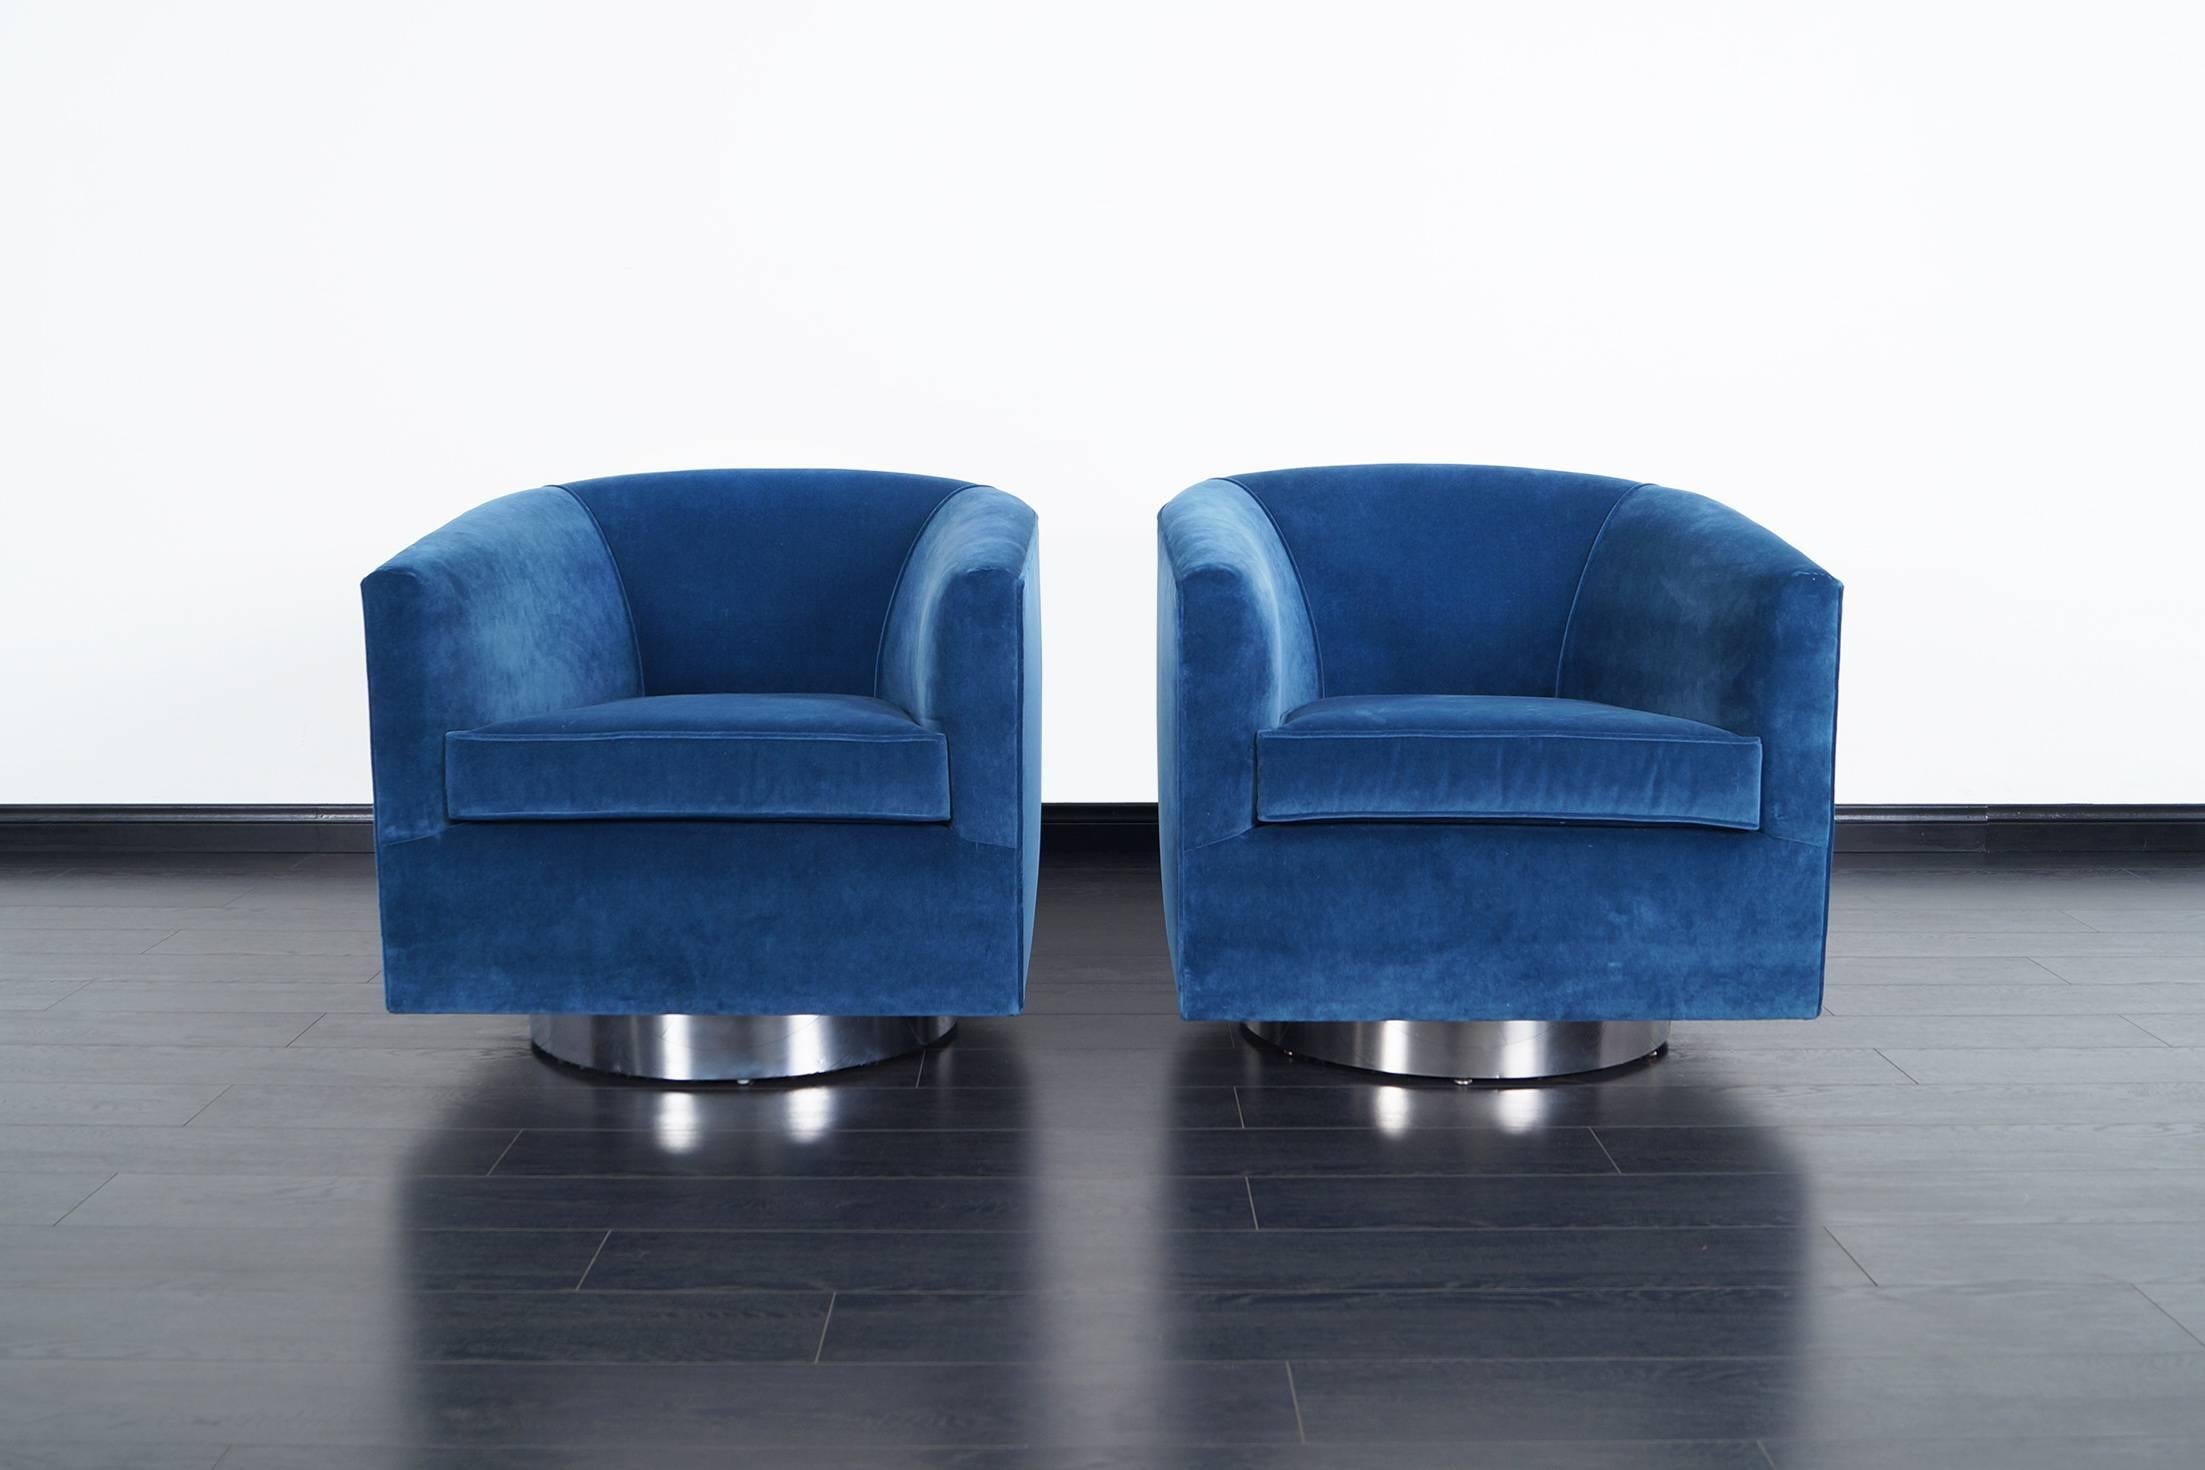 A stunning pair pf swivel lounge chairs designed by Milo Baughman. Each chair has a circular chrome base that swivel with ease. They are extremely comfortable. The chair are newly upholstered in a beautiful blue velvet.